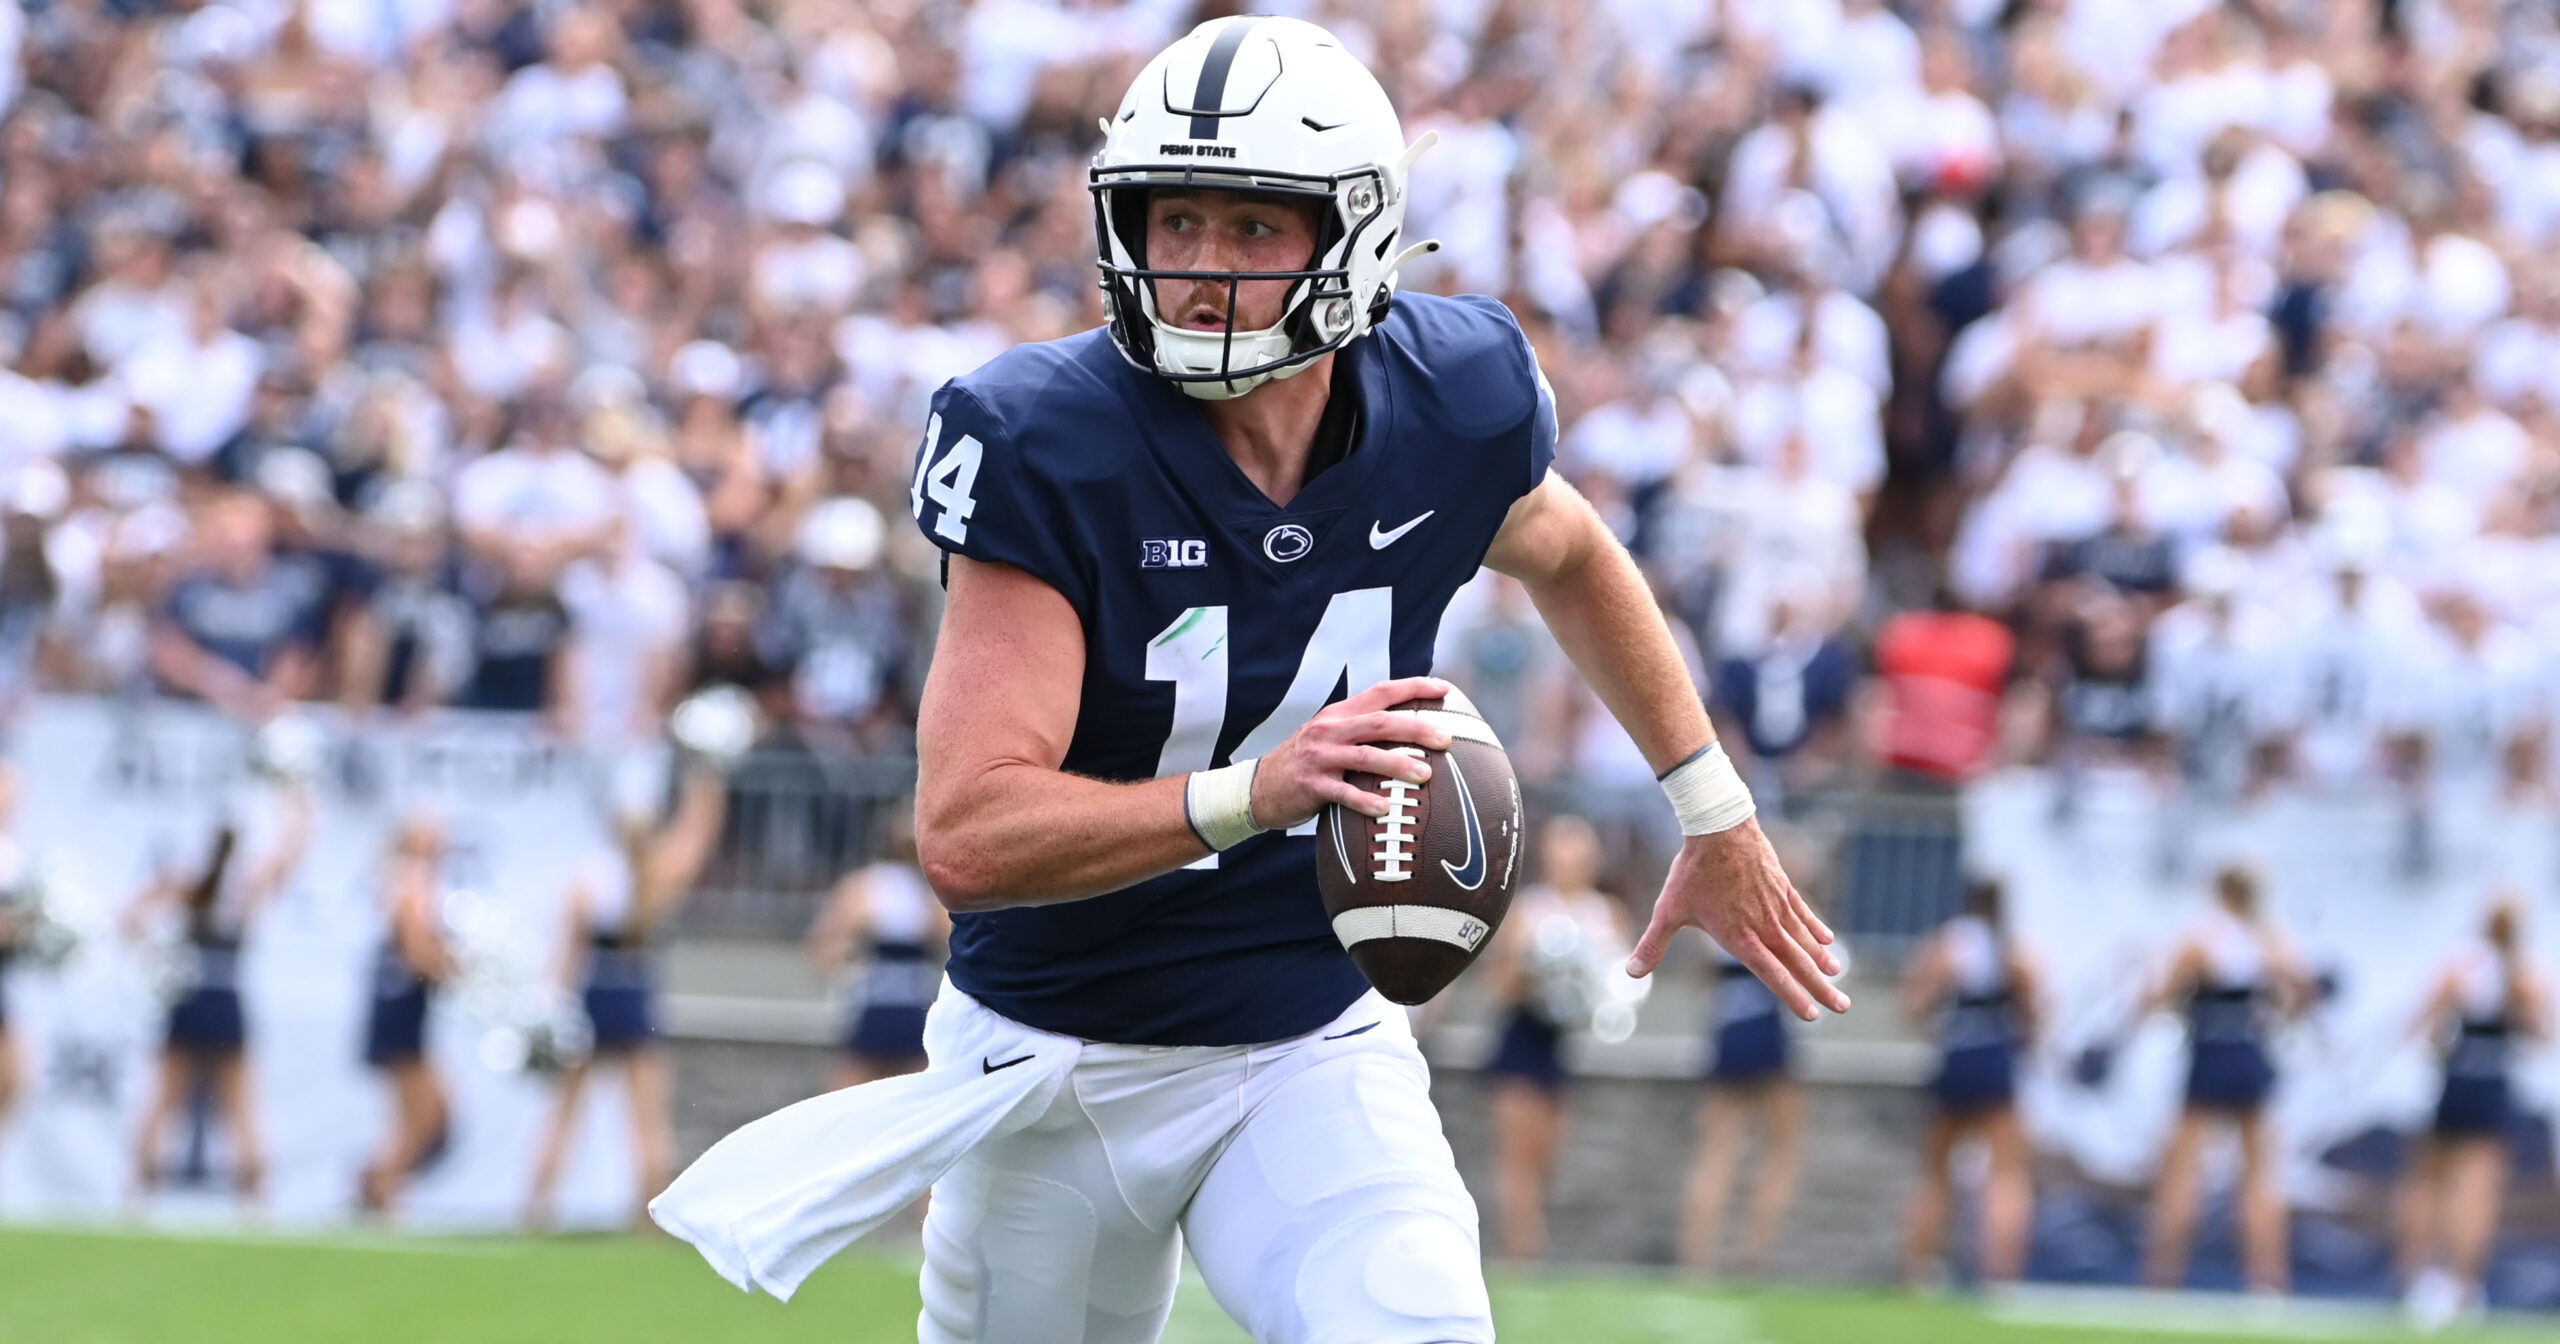 How did Penn State's offensive players perform in 2022? Recapping PFF